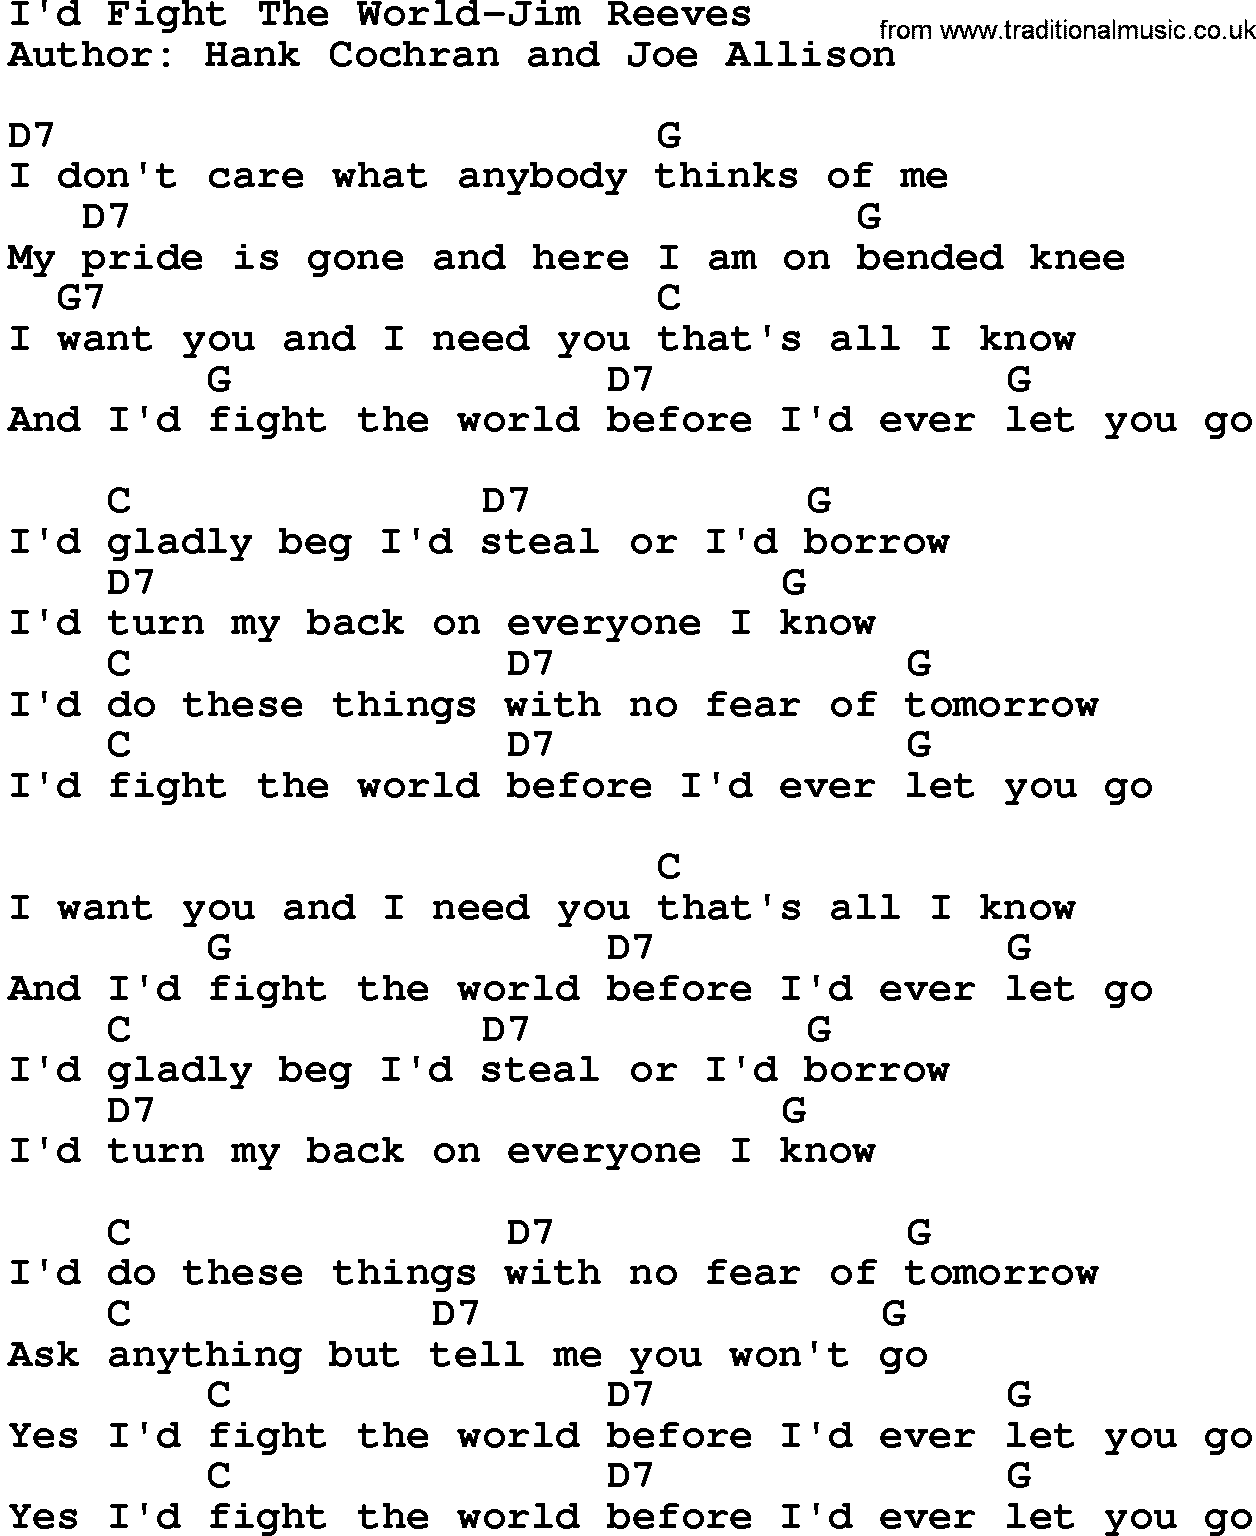 Country music song: I'd Fight The World-Jim Reeves lyrics and chords